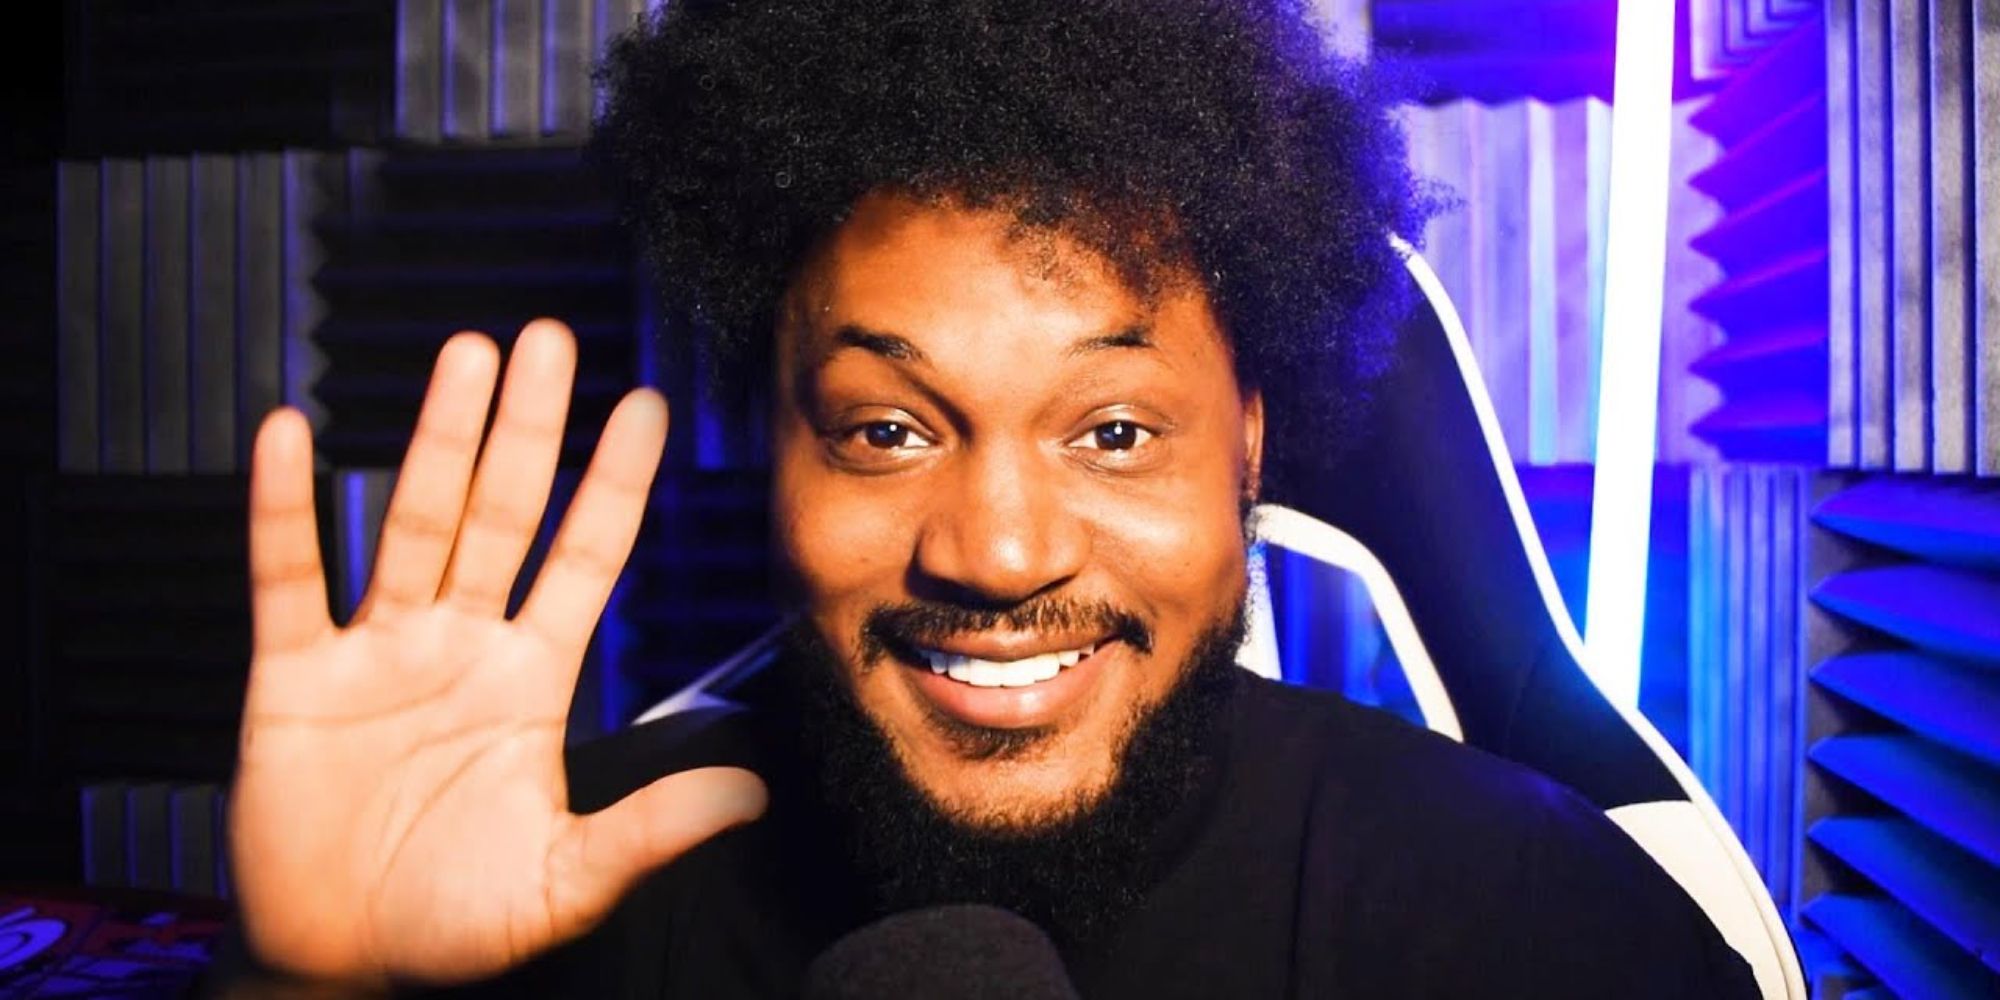 An image of CoryXKenshin, a youtuber who had a cameo in the Five Nights At Freddy's Movie